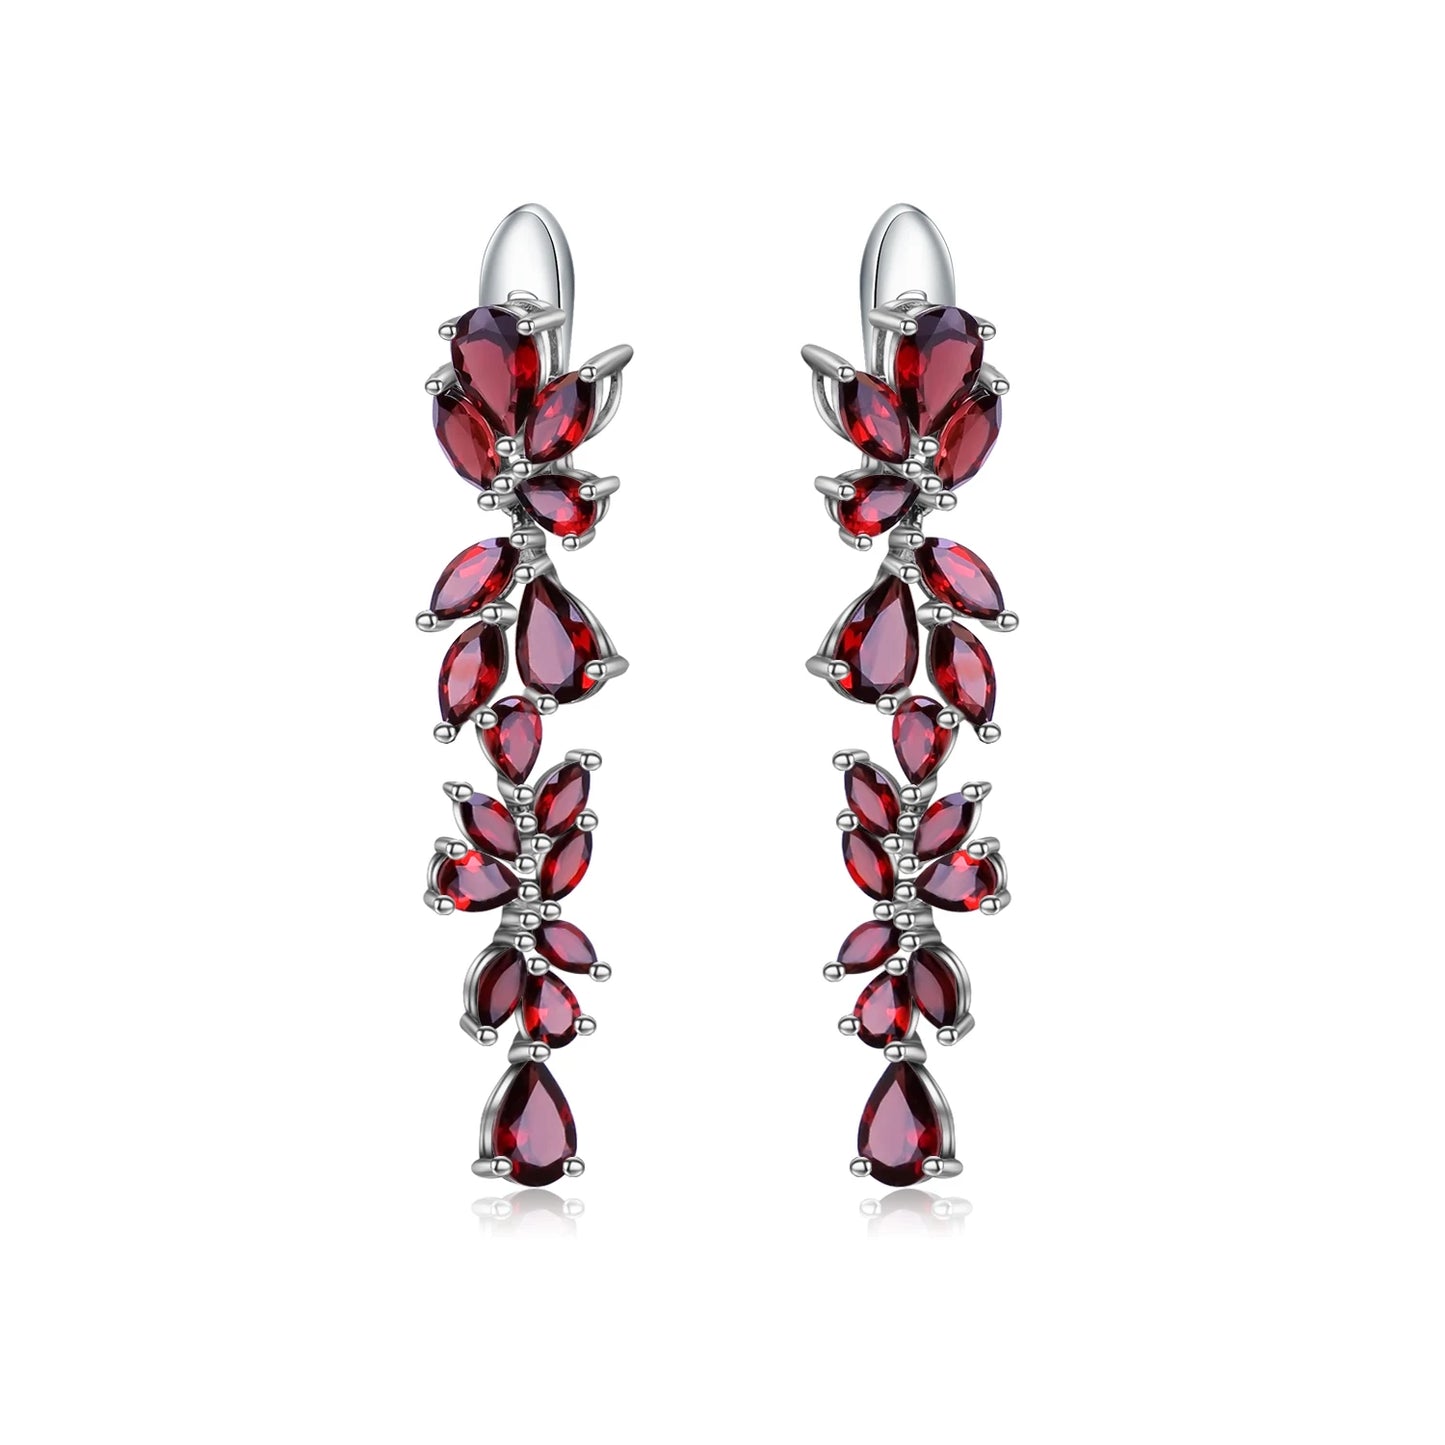 GEM'S BALLET 20.35Ct Natural Red Garnet Earrings 925 Sterling Sliver Leaves Branches Drop Earrings For Women Engagement Jewelry Red Garnet 925 Sterling Sliver CHINA